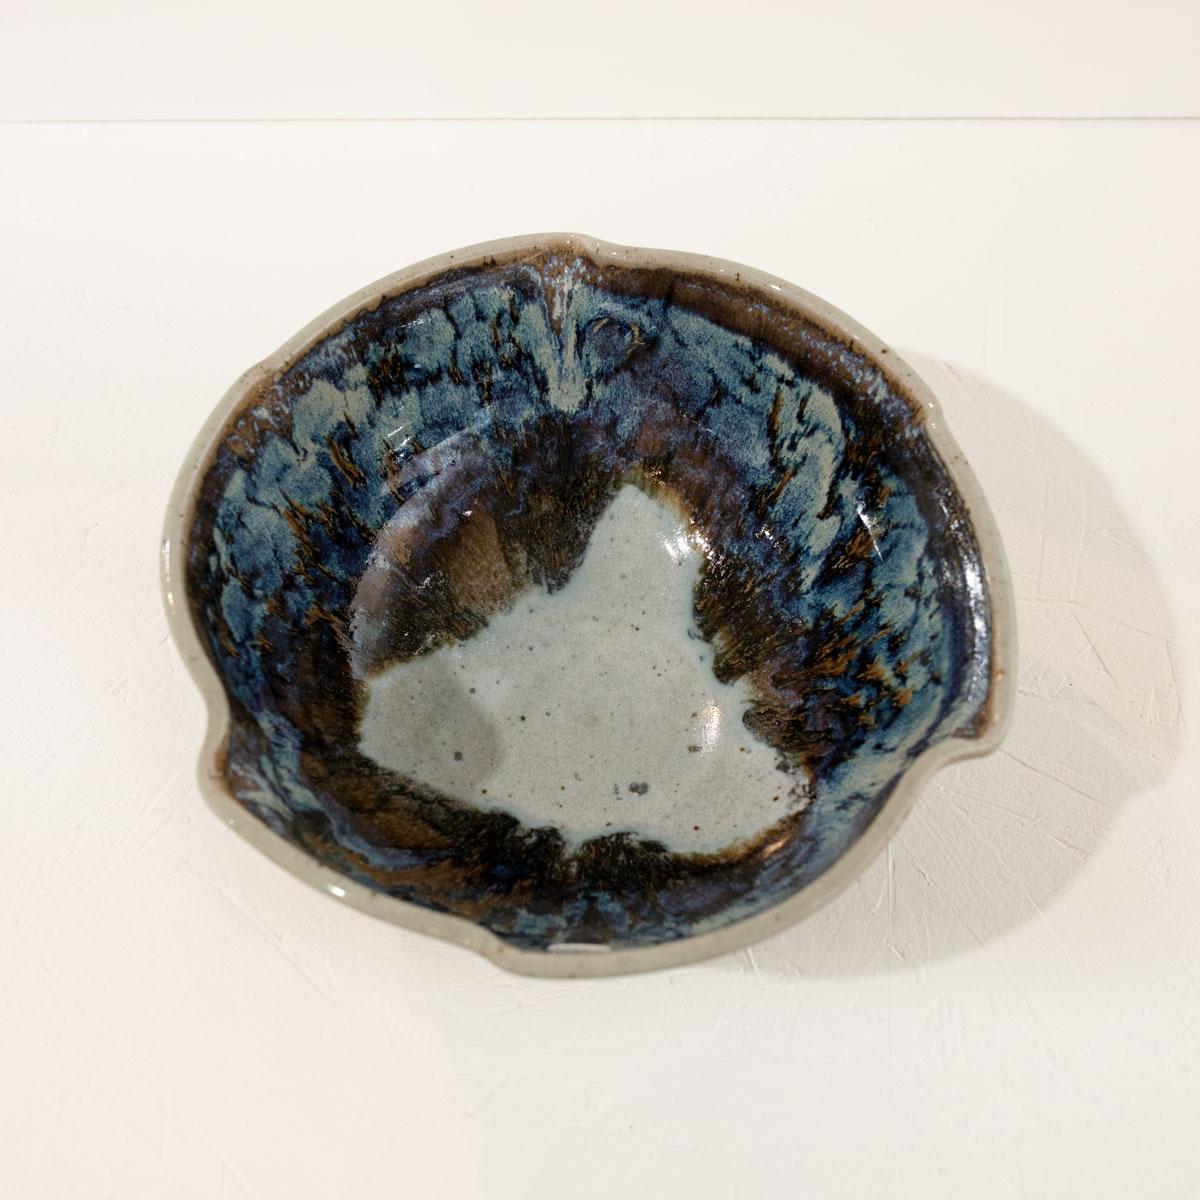 This glazed ceramic bowl features a blue, white, and light umber palette with a creme-toned interior, crimped rim. The artist's stamp is located at the base of the bowl.

Crystalline glazes are special ceramic glazes in which zinc-silicate crystals